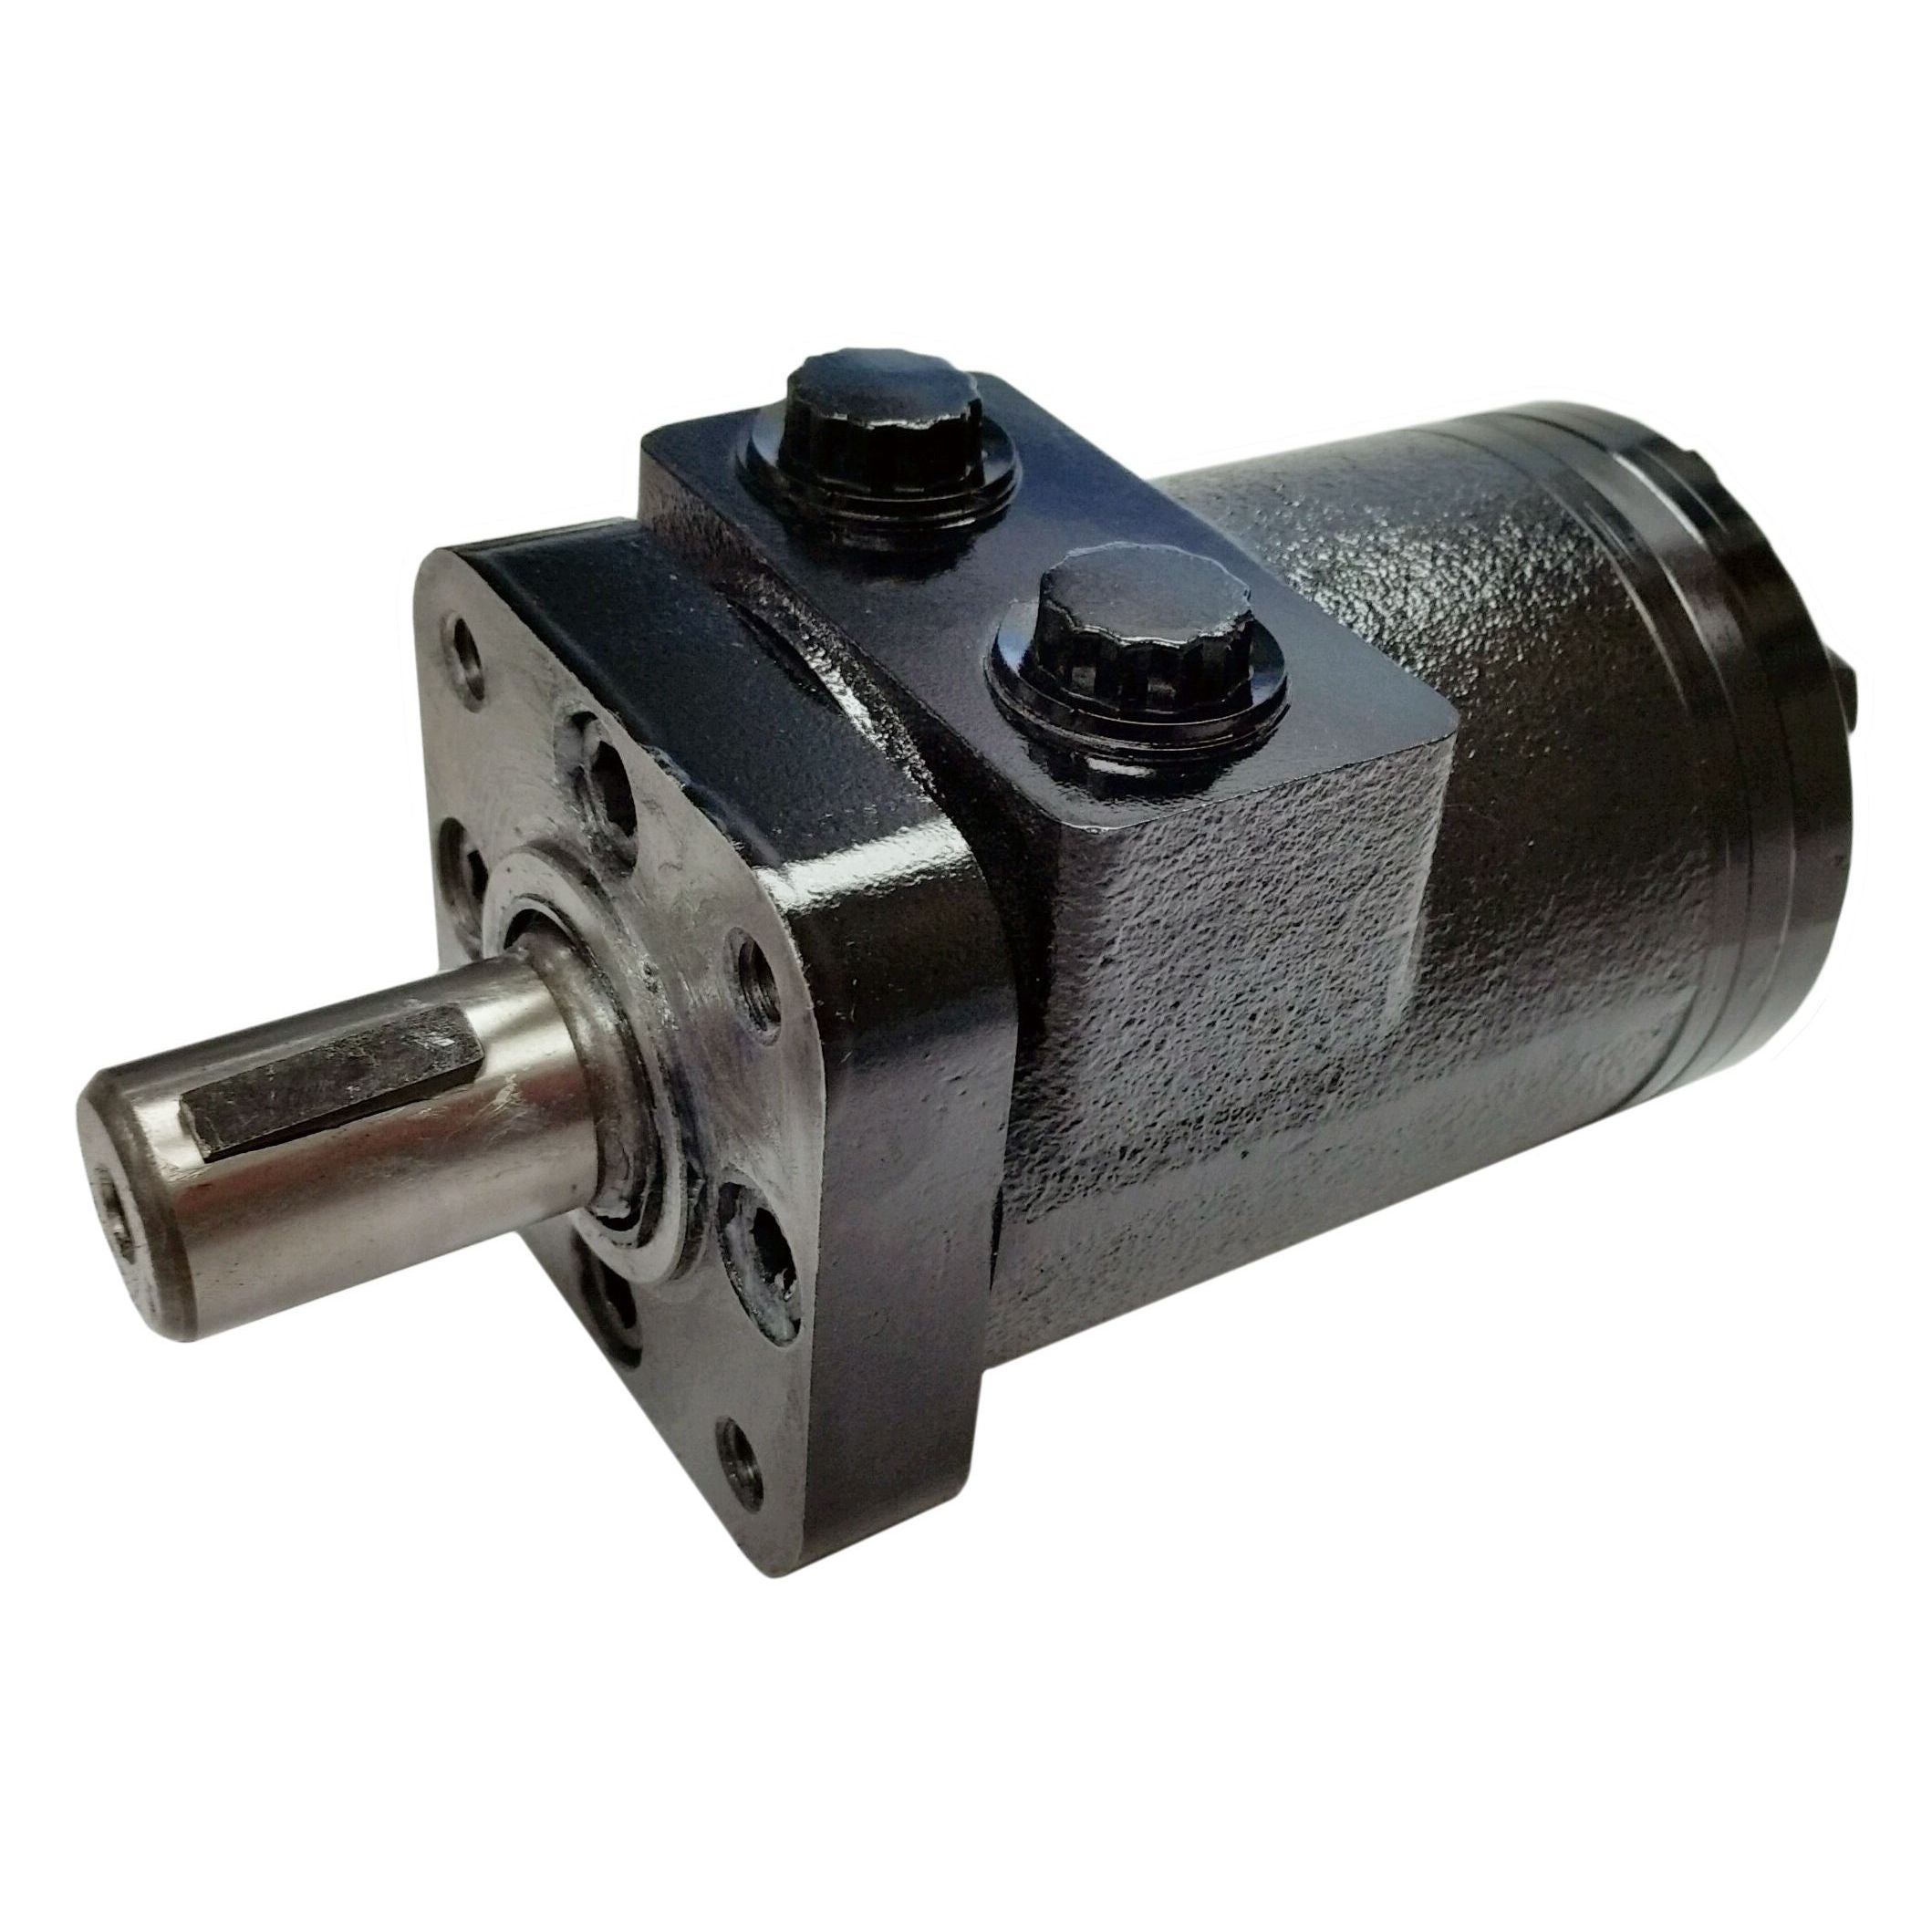 BMPH-80-H4-K-P : Dynamic LSHT Motor, 77.7cc, 770RPM, 1292in-lb, 2031psi Differential, 15.85GPM, SAE A 4-Bolt Mount, 1" Bore x 1/4" Key Shaft, Side Ported, 1/2" NPT